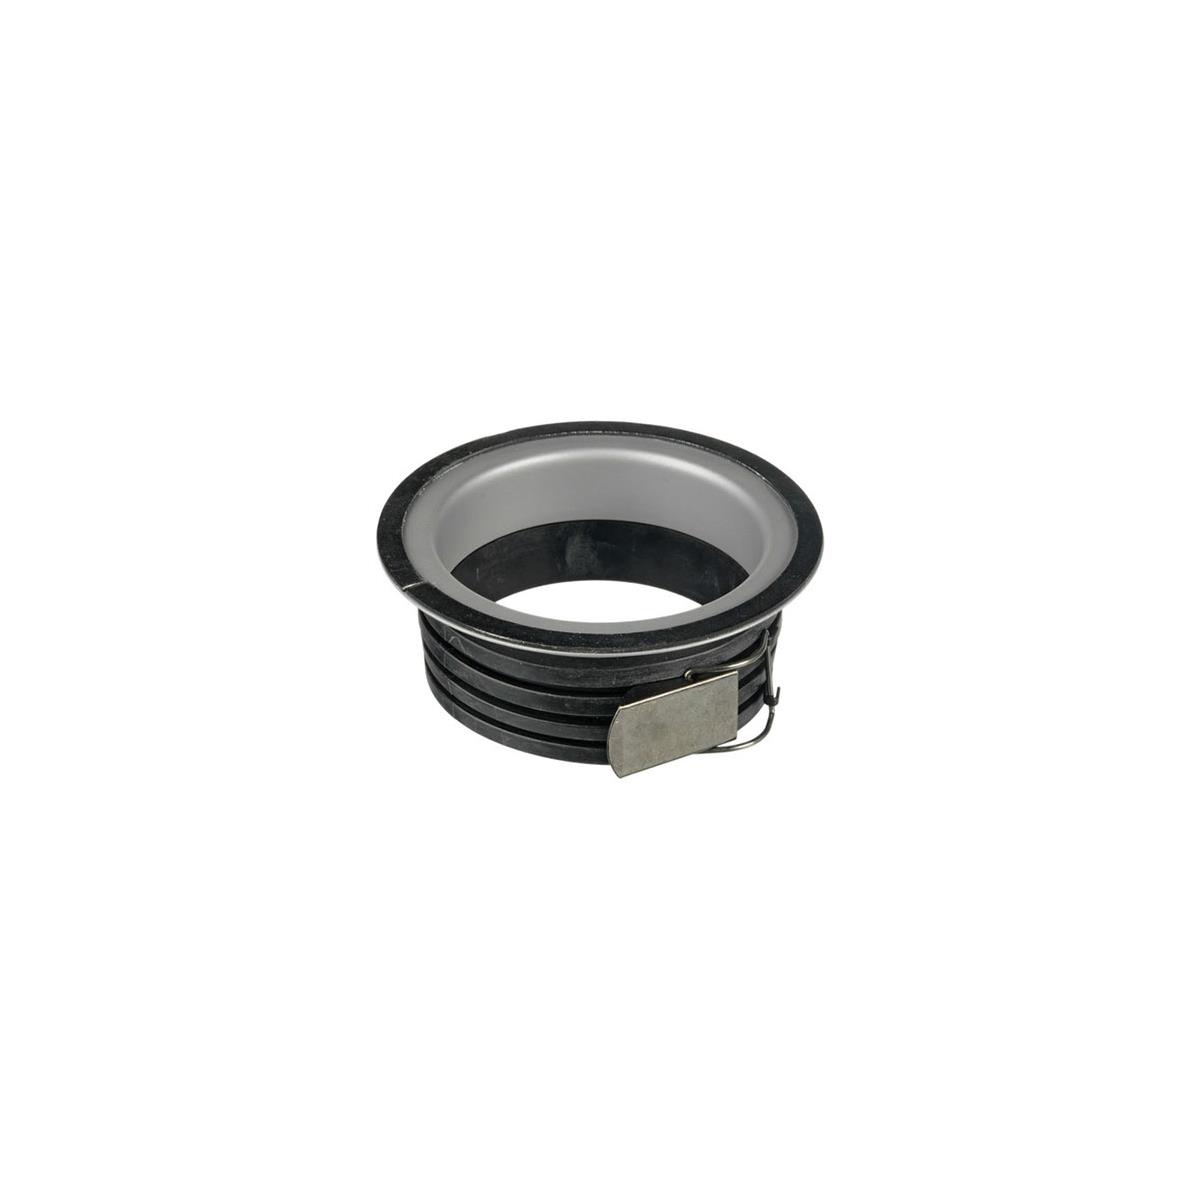 Image of Mola Speed Ring for Profoto